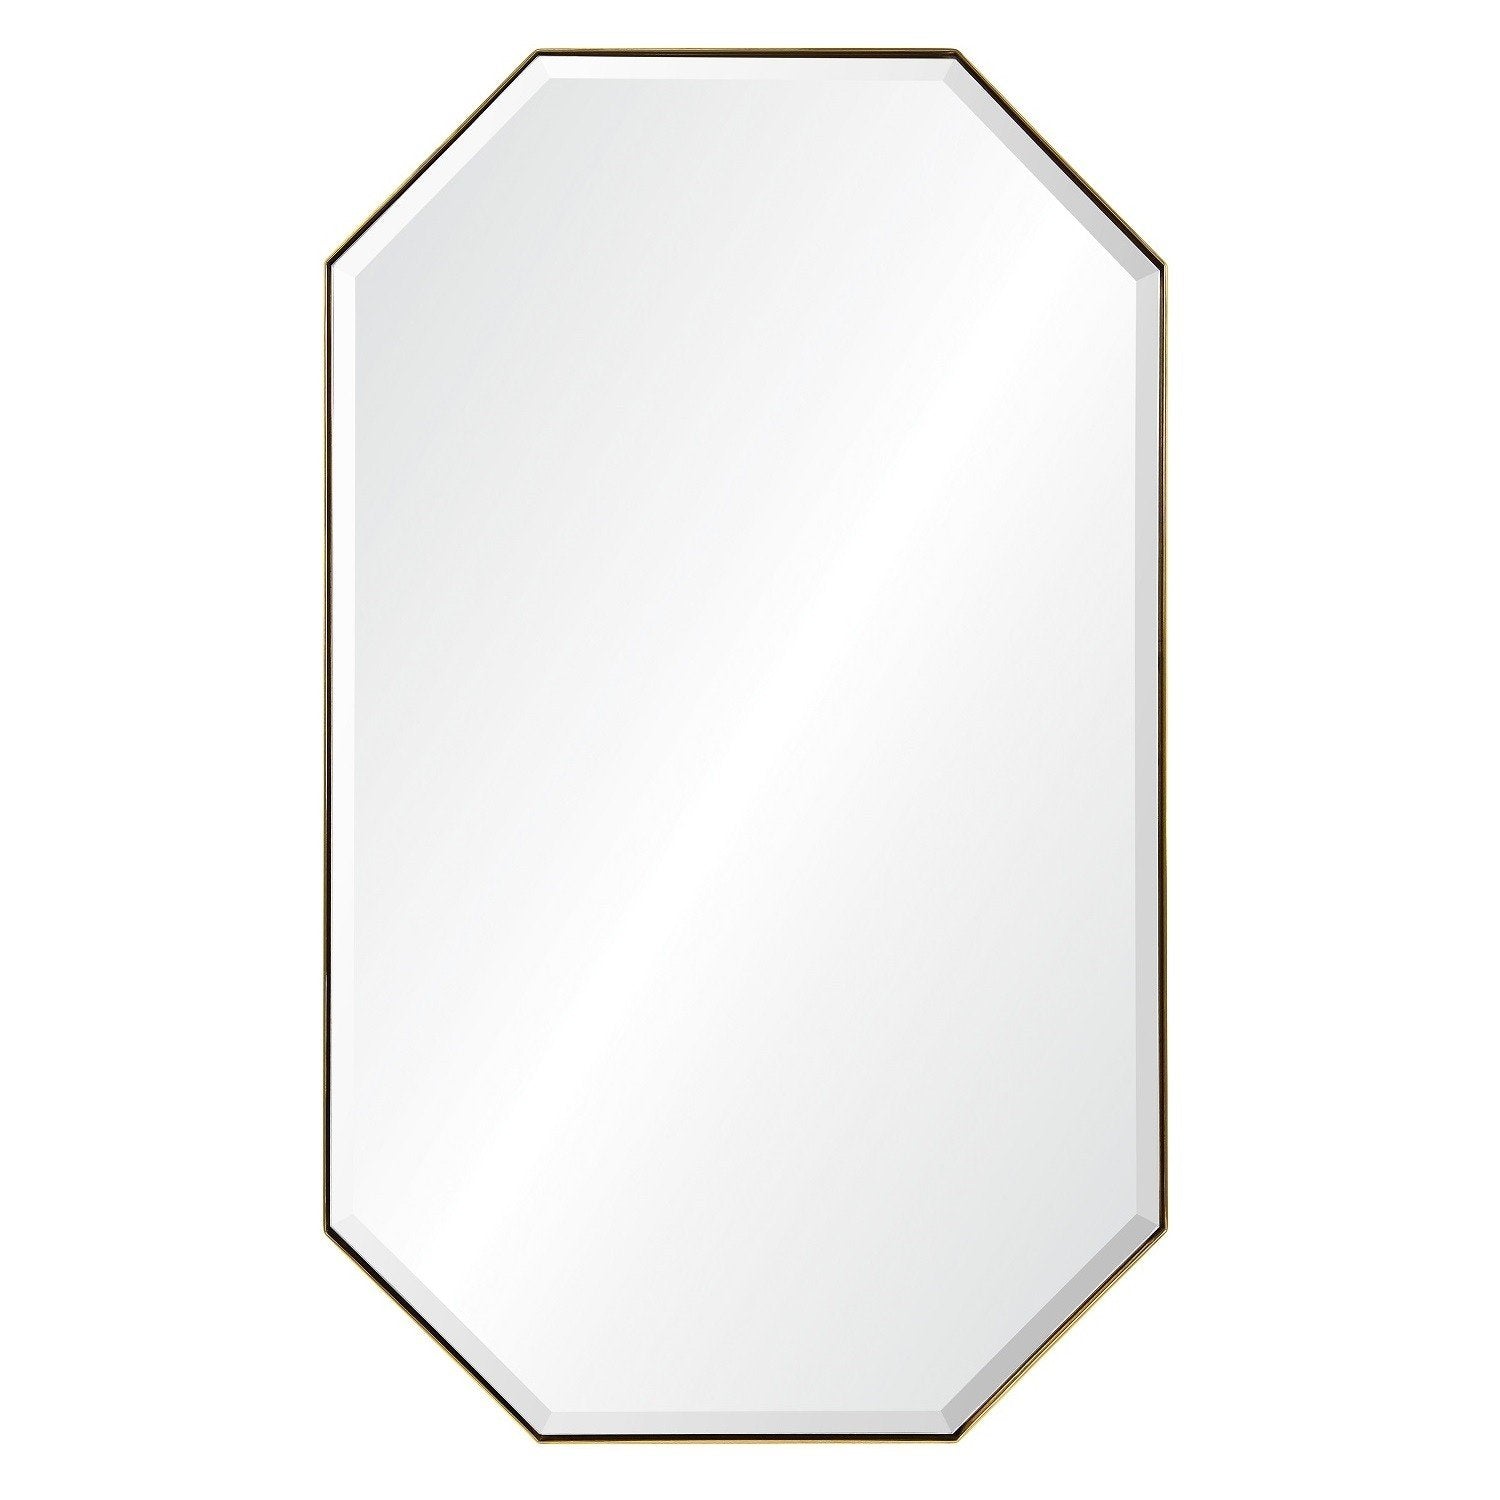 Fig Linens - Mirror Image Home - Burnished Brass Octagonal Mirror 